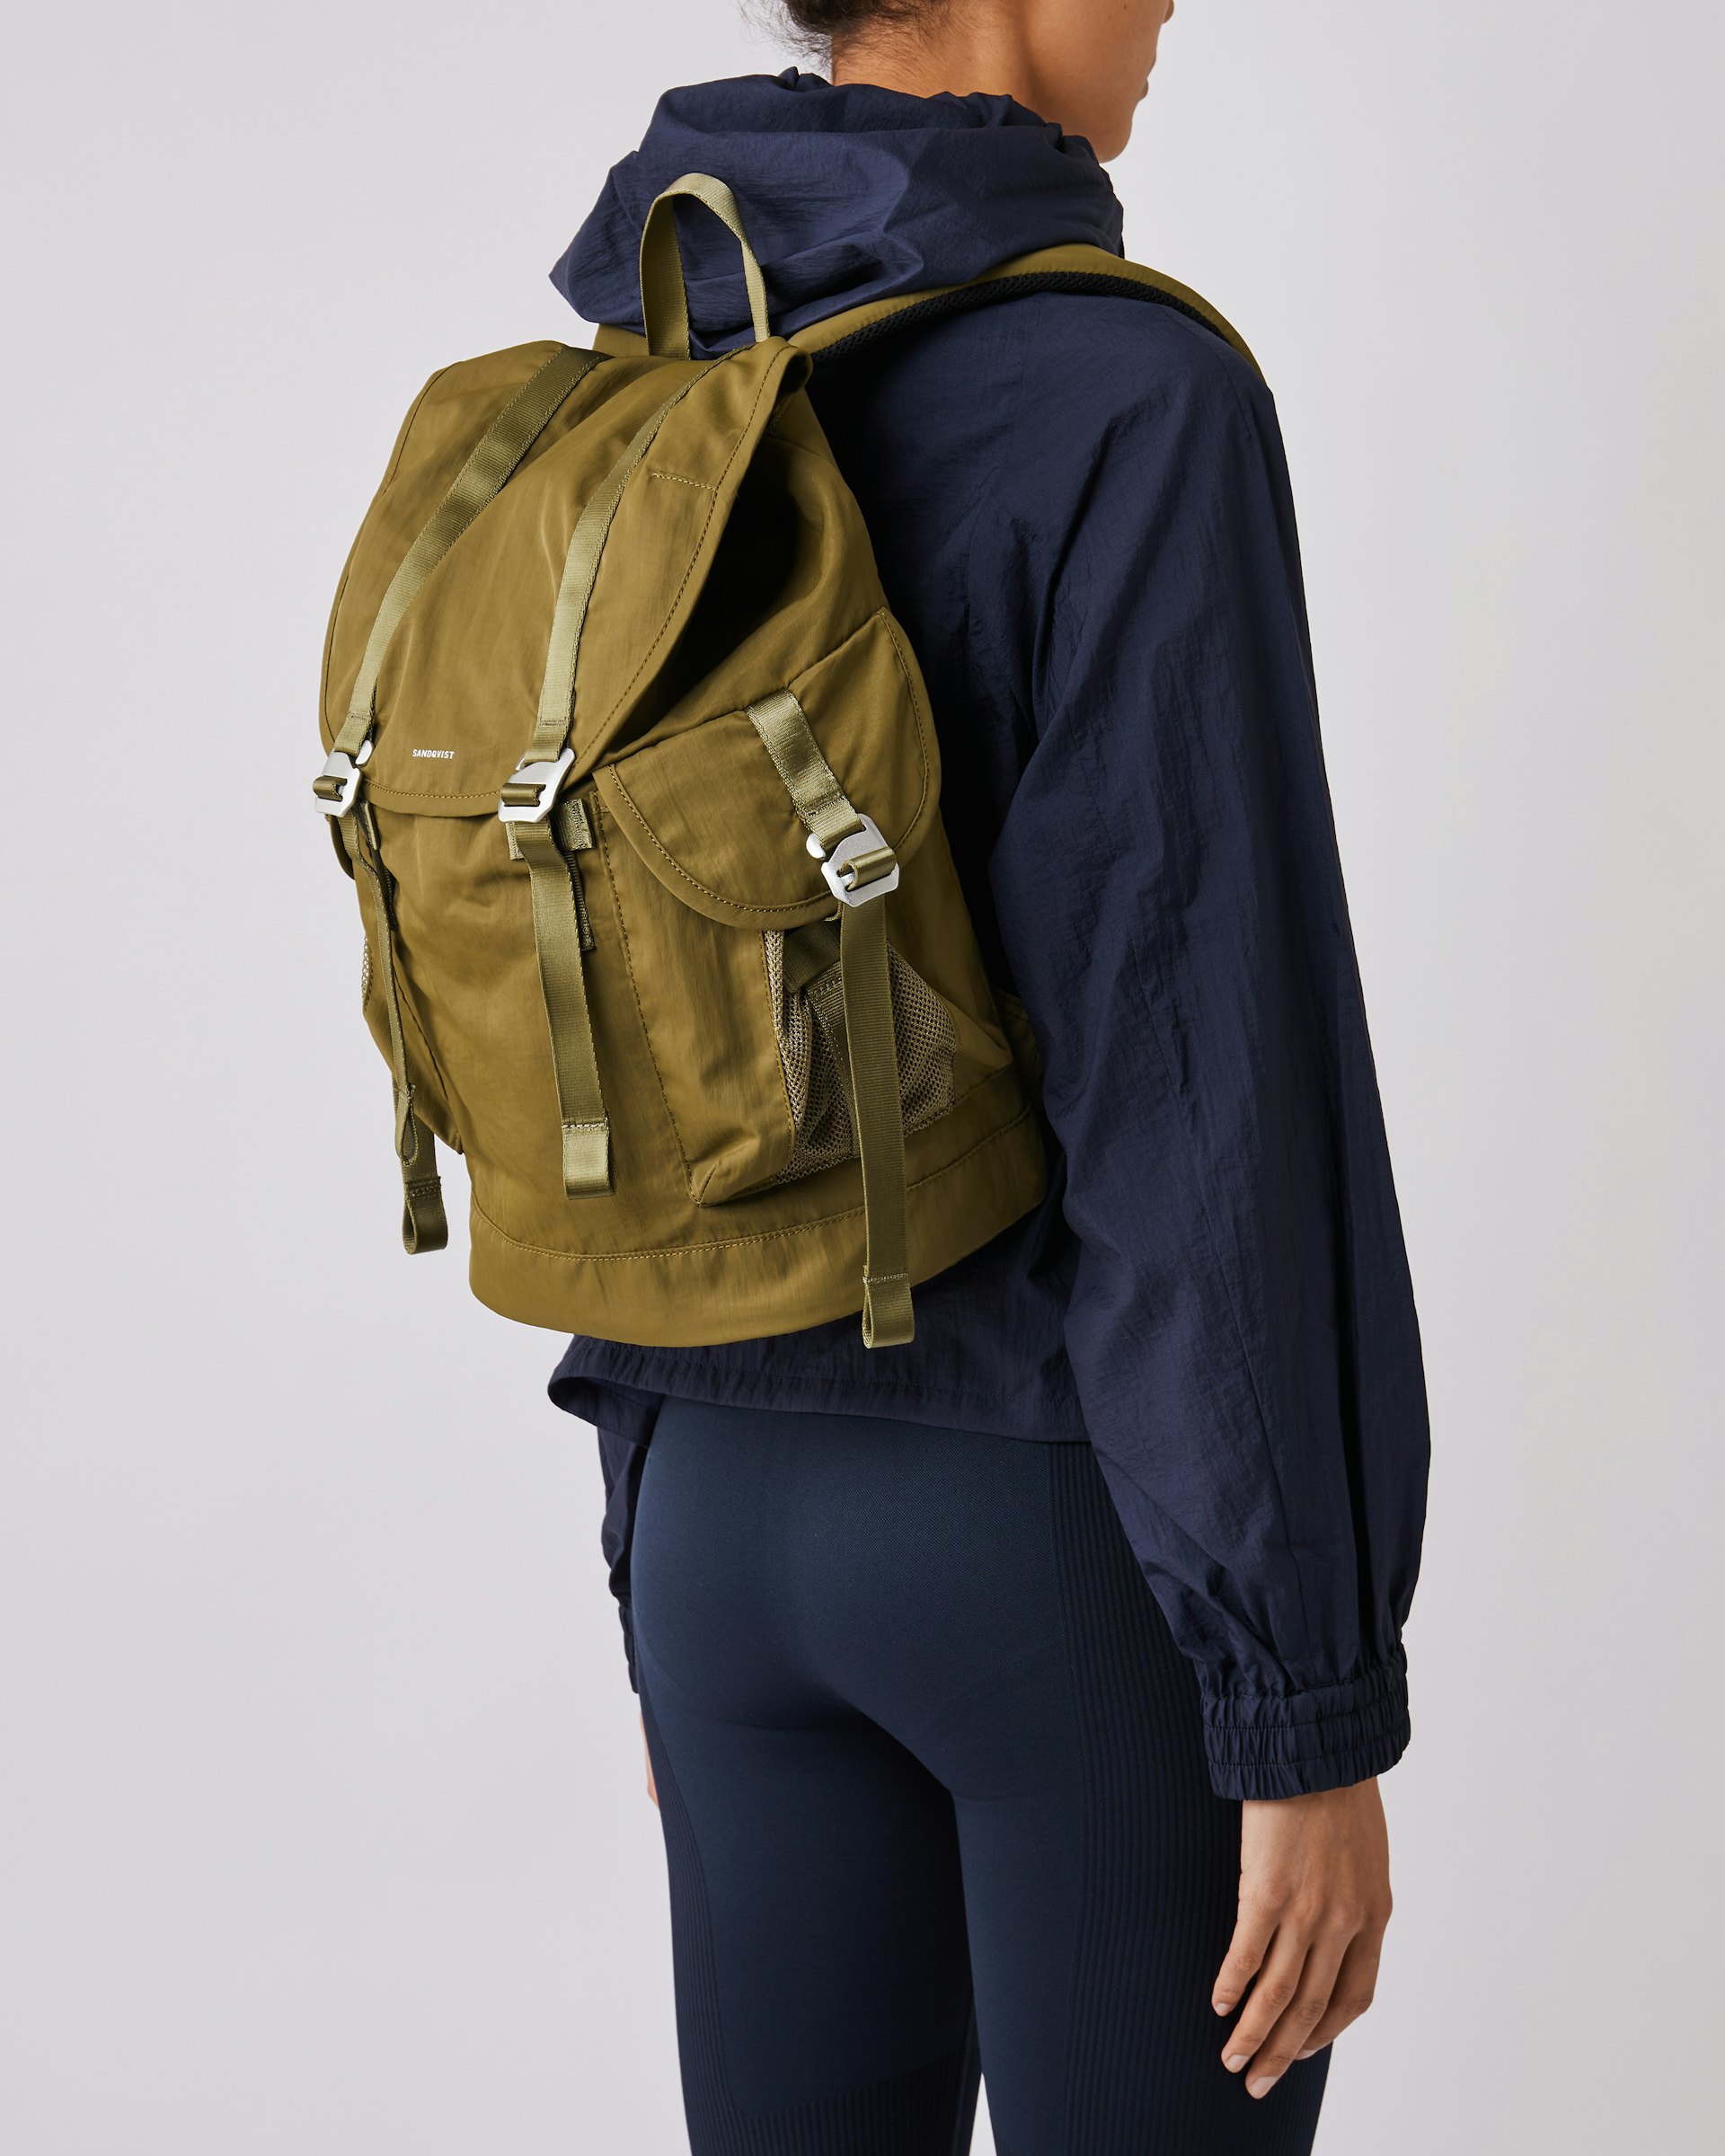 Charlie Vegan belongs to the category Backpacks and is in color military olive (7 of 7)